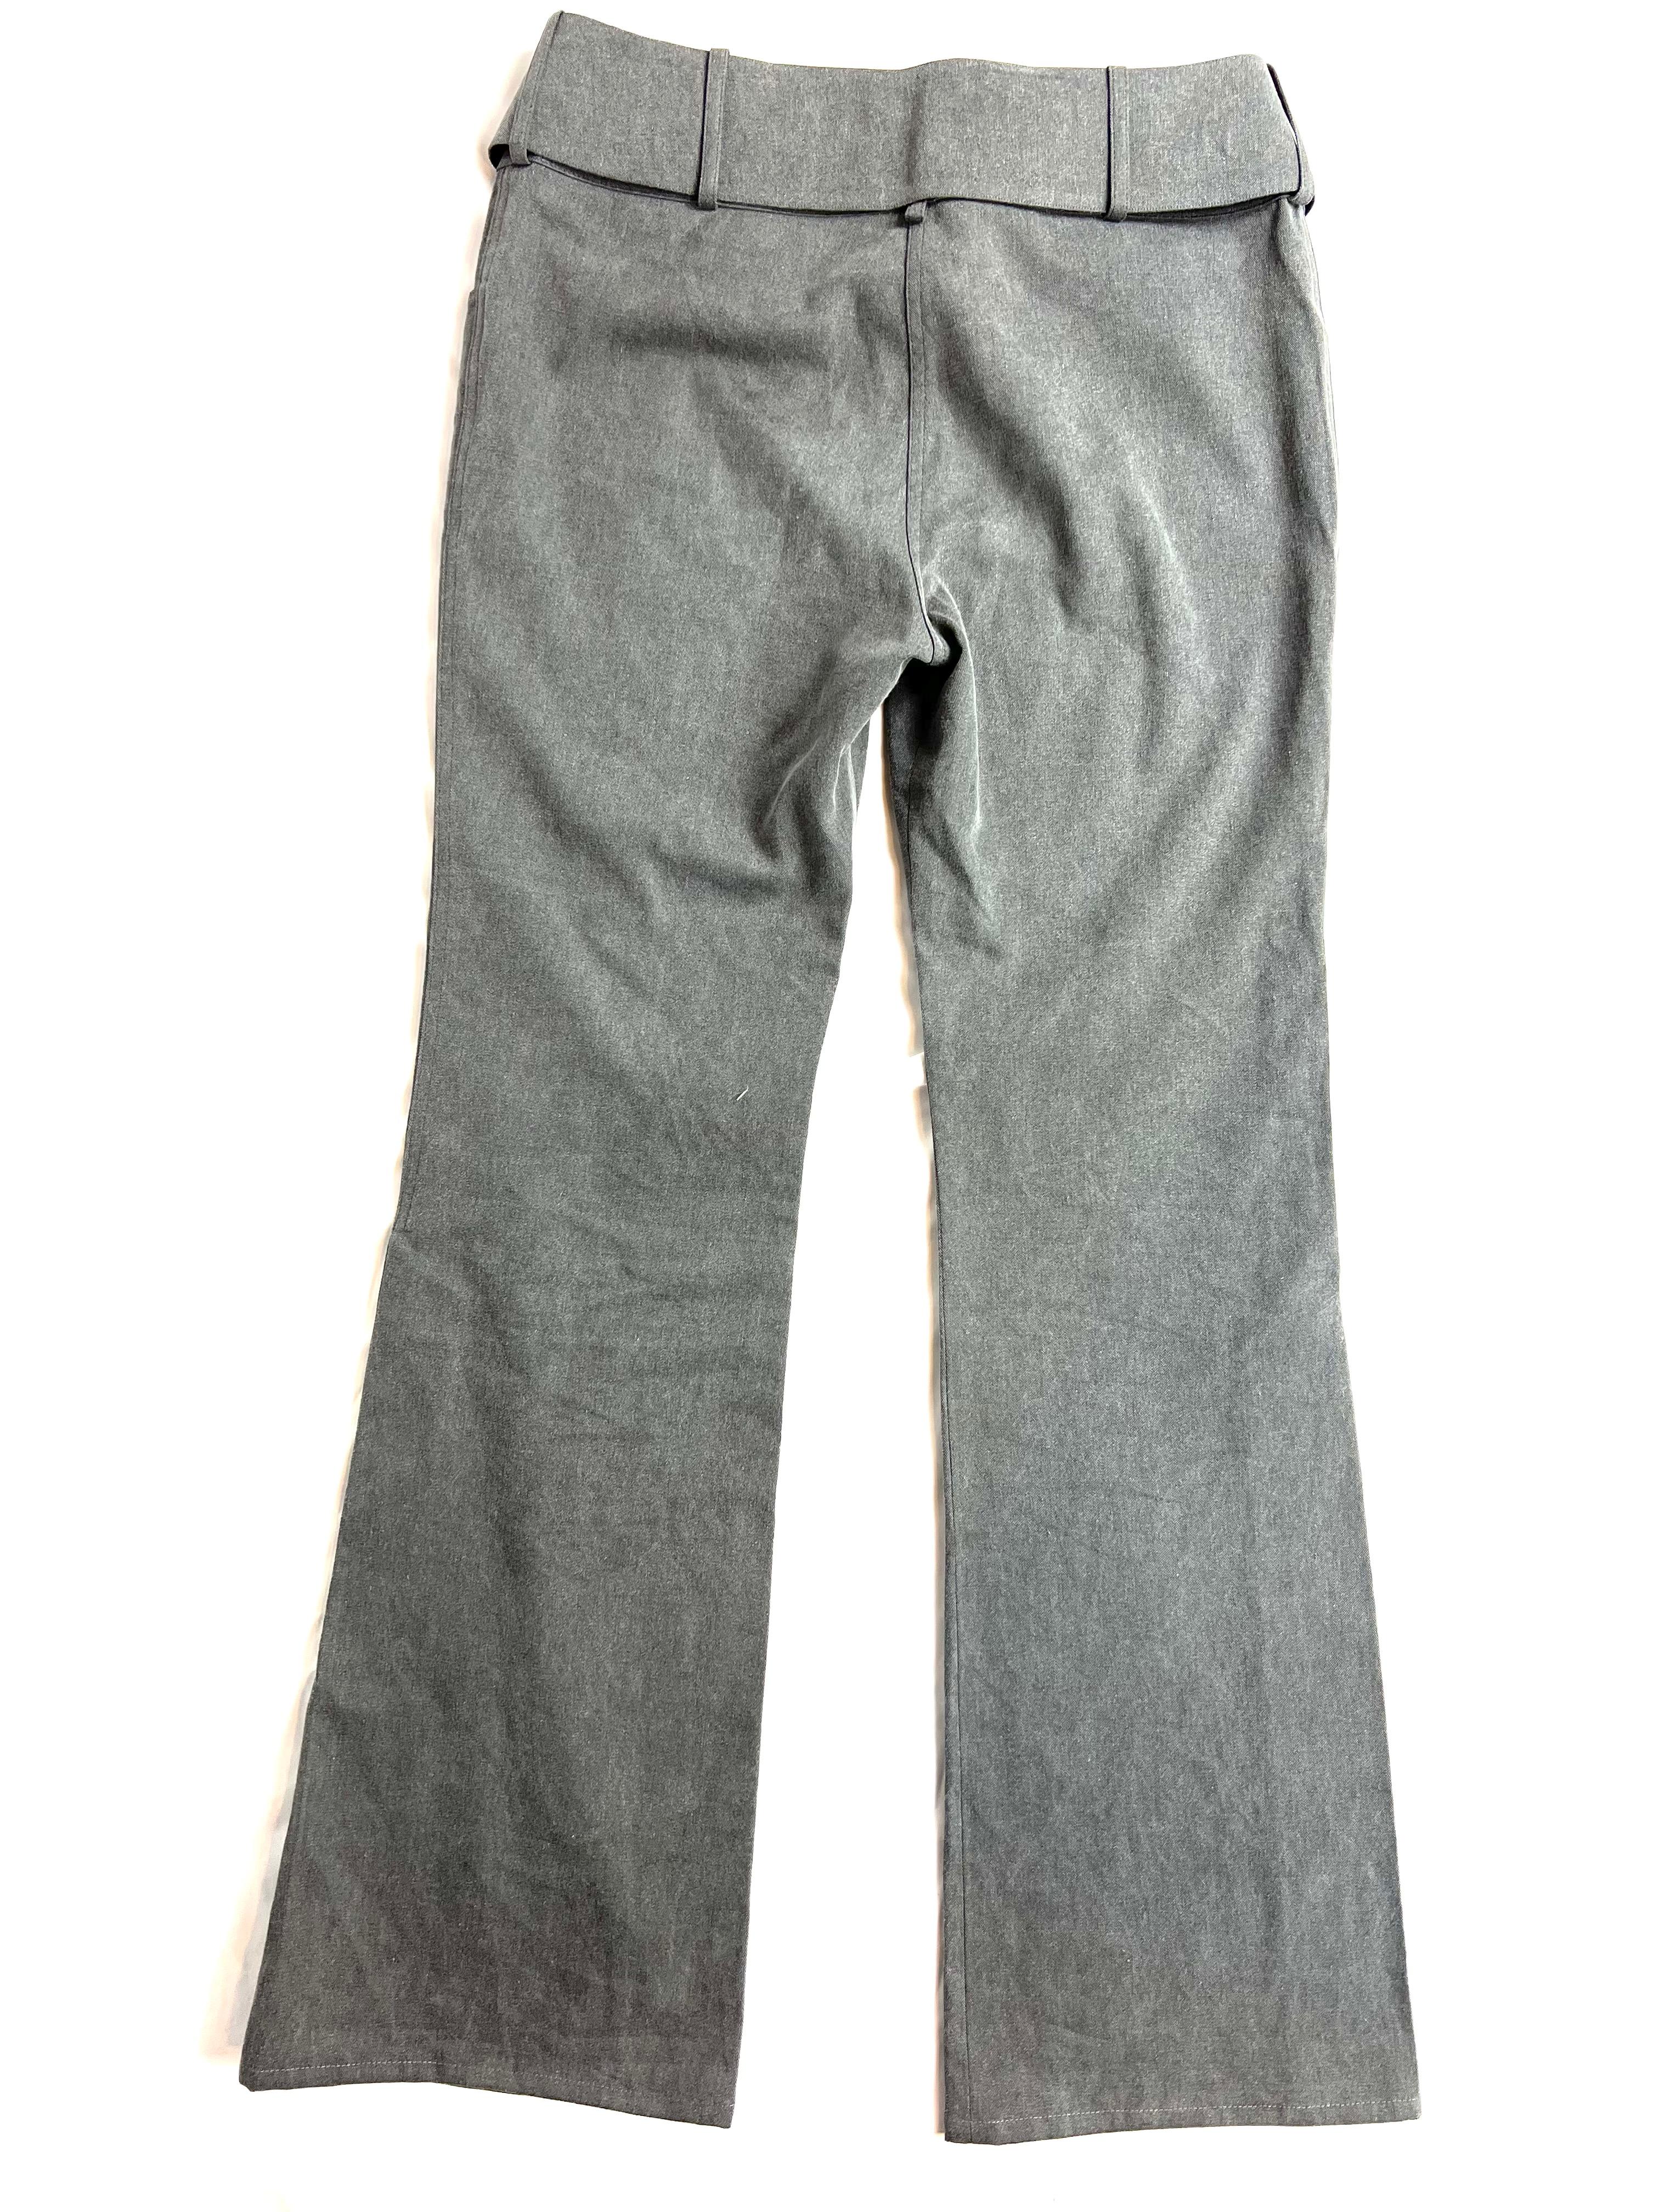 Christian Dior Grey Jeans Pants, Size 10 For Sale 1